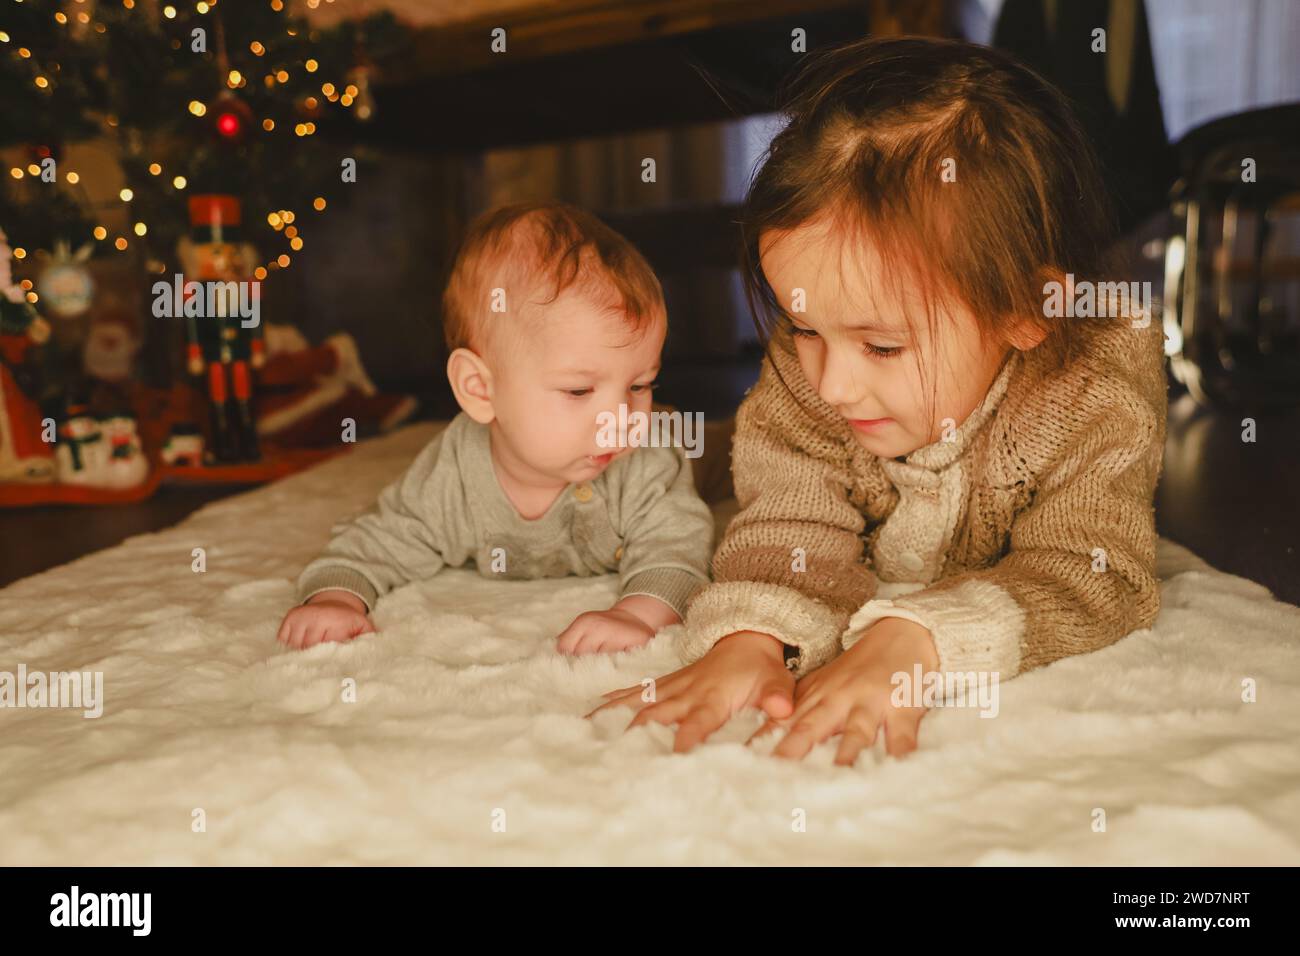 little girl and baby near the christmas tree, christmas celebrate Stock Photo